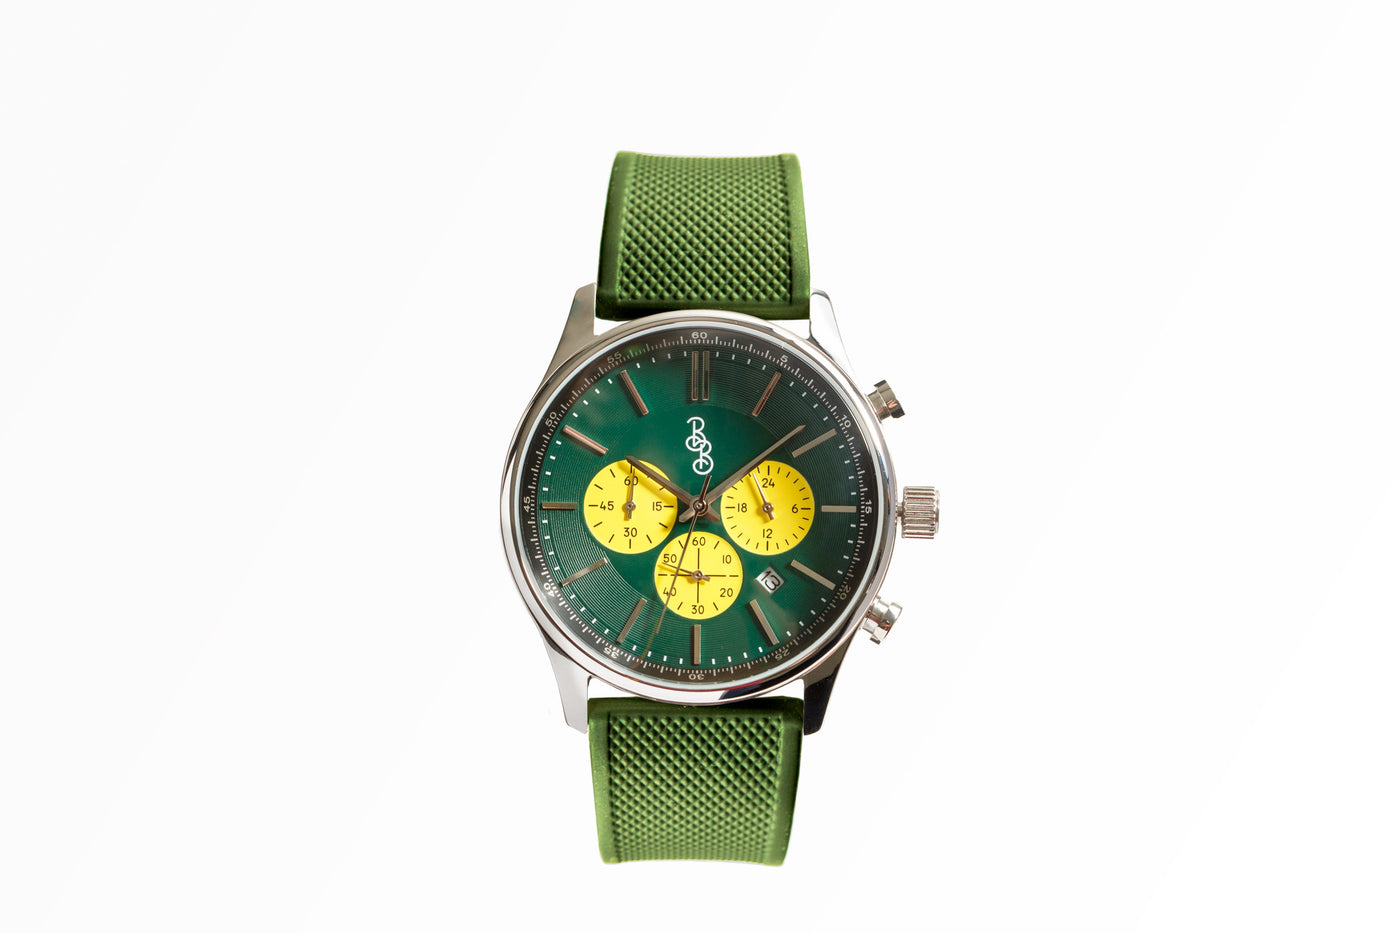 The Beyond Boring Watch Company 41mm Green and Yellow Chronograph